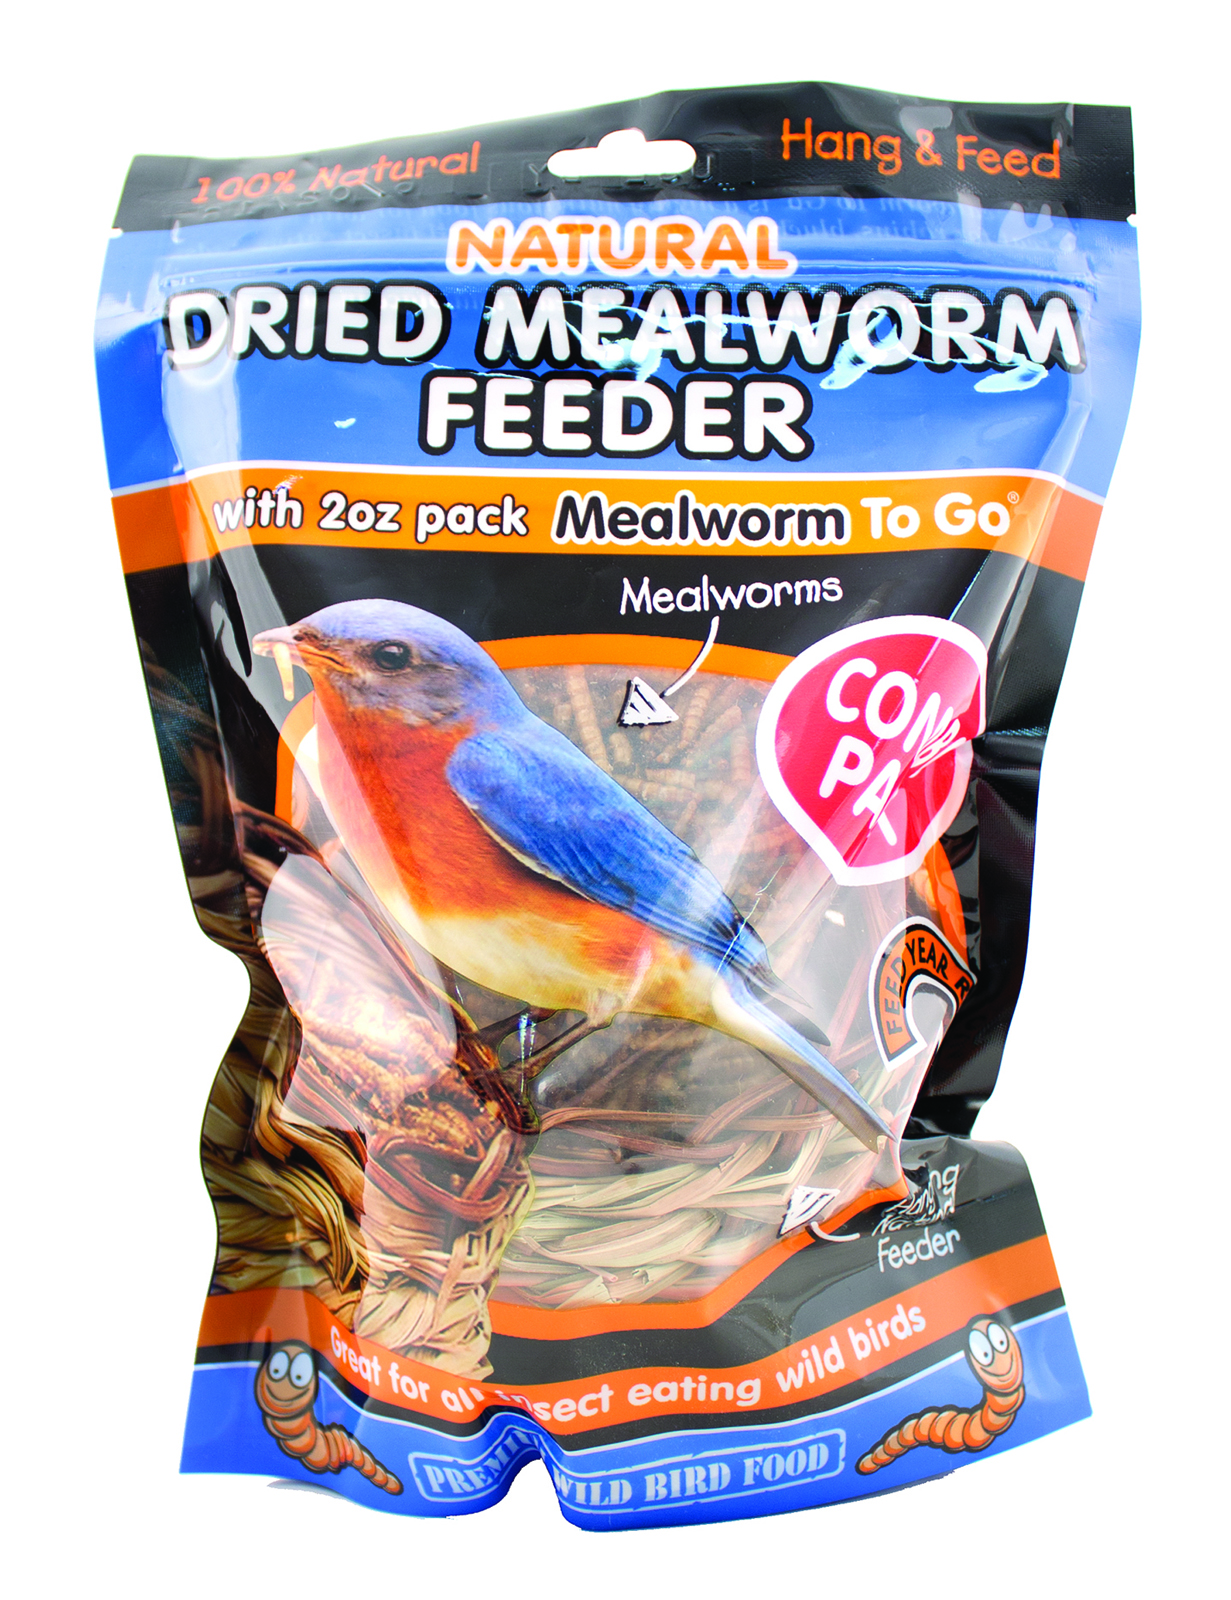 NATURAL REED FEEDER WITH MEALWORM TO GO